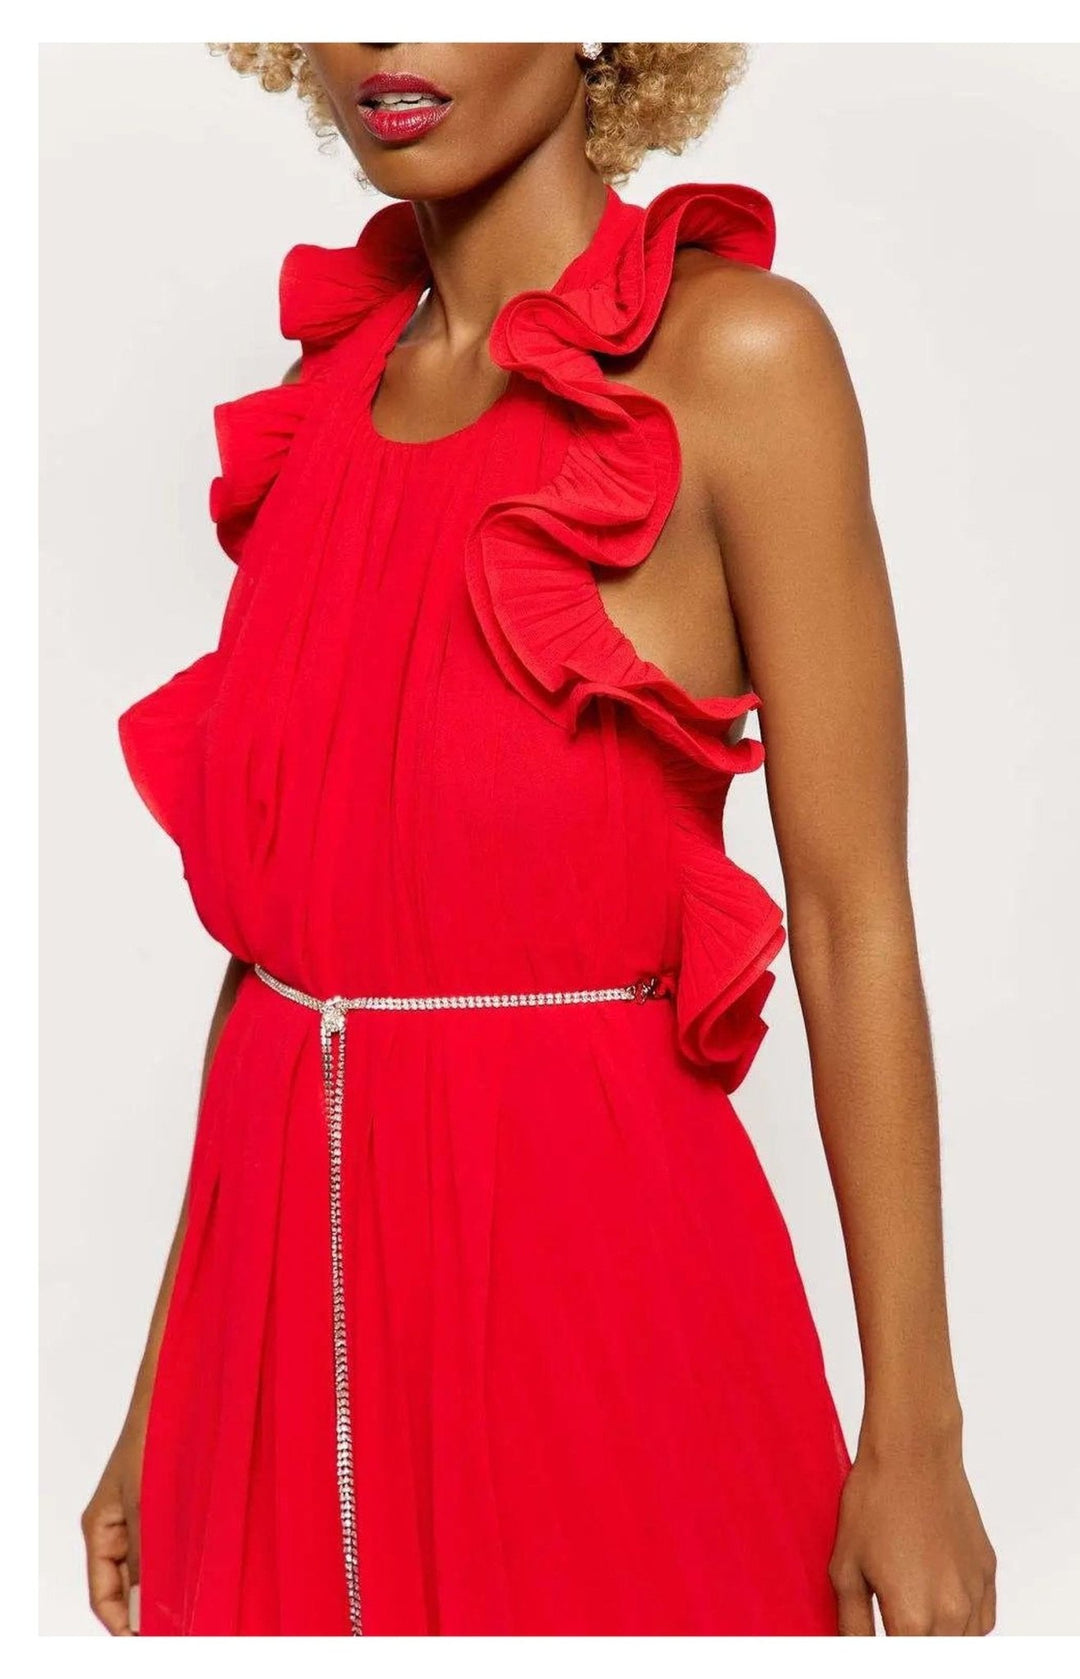 Rihanna Backless Red Party Dress - Fashion Elixir